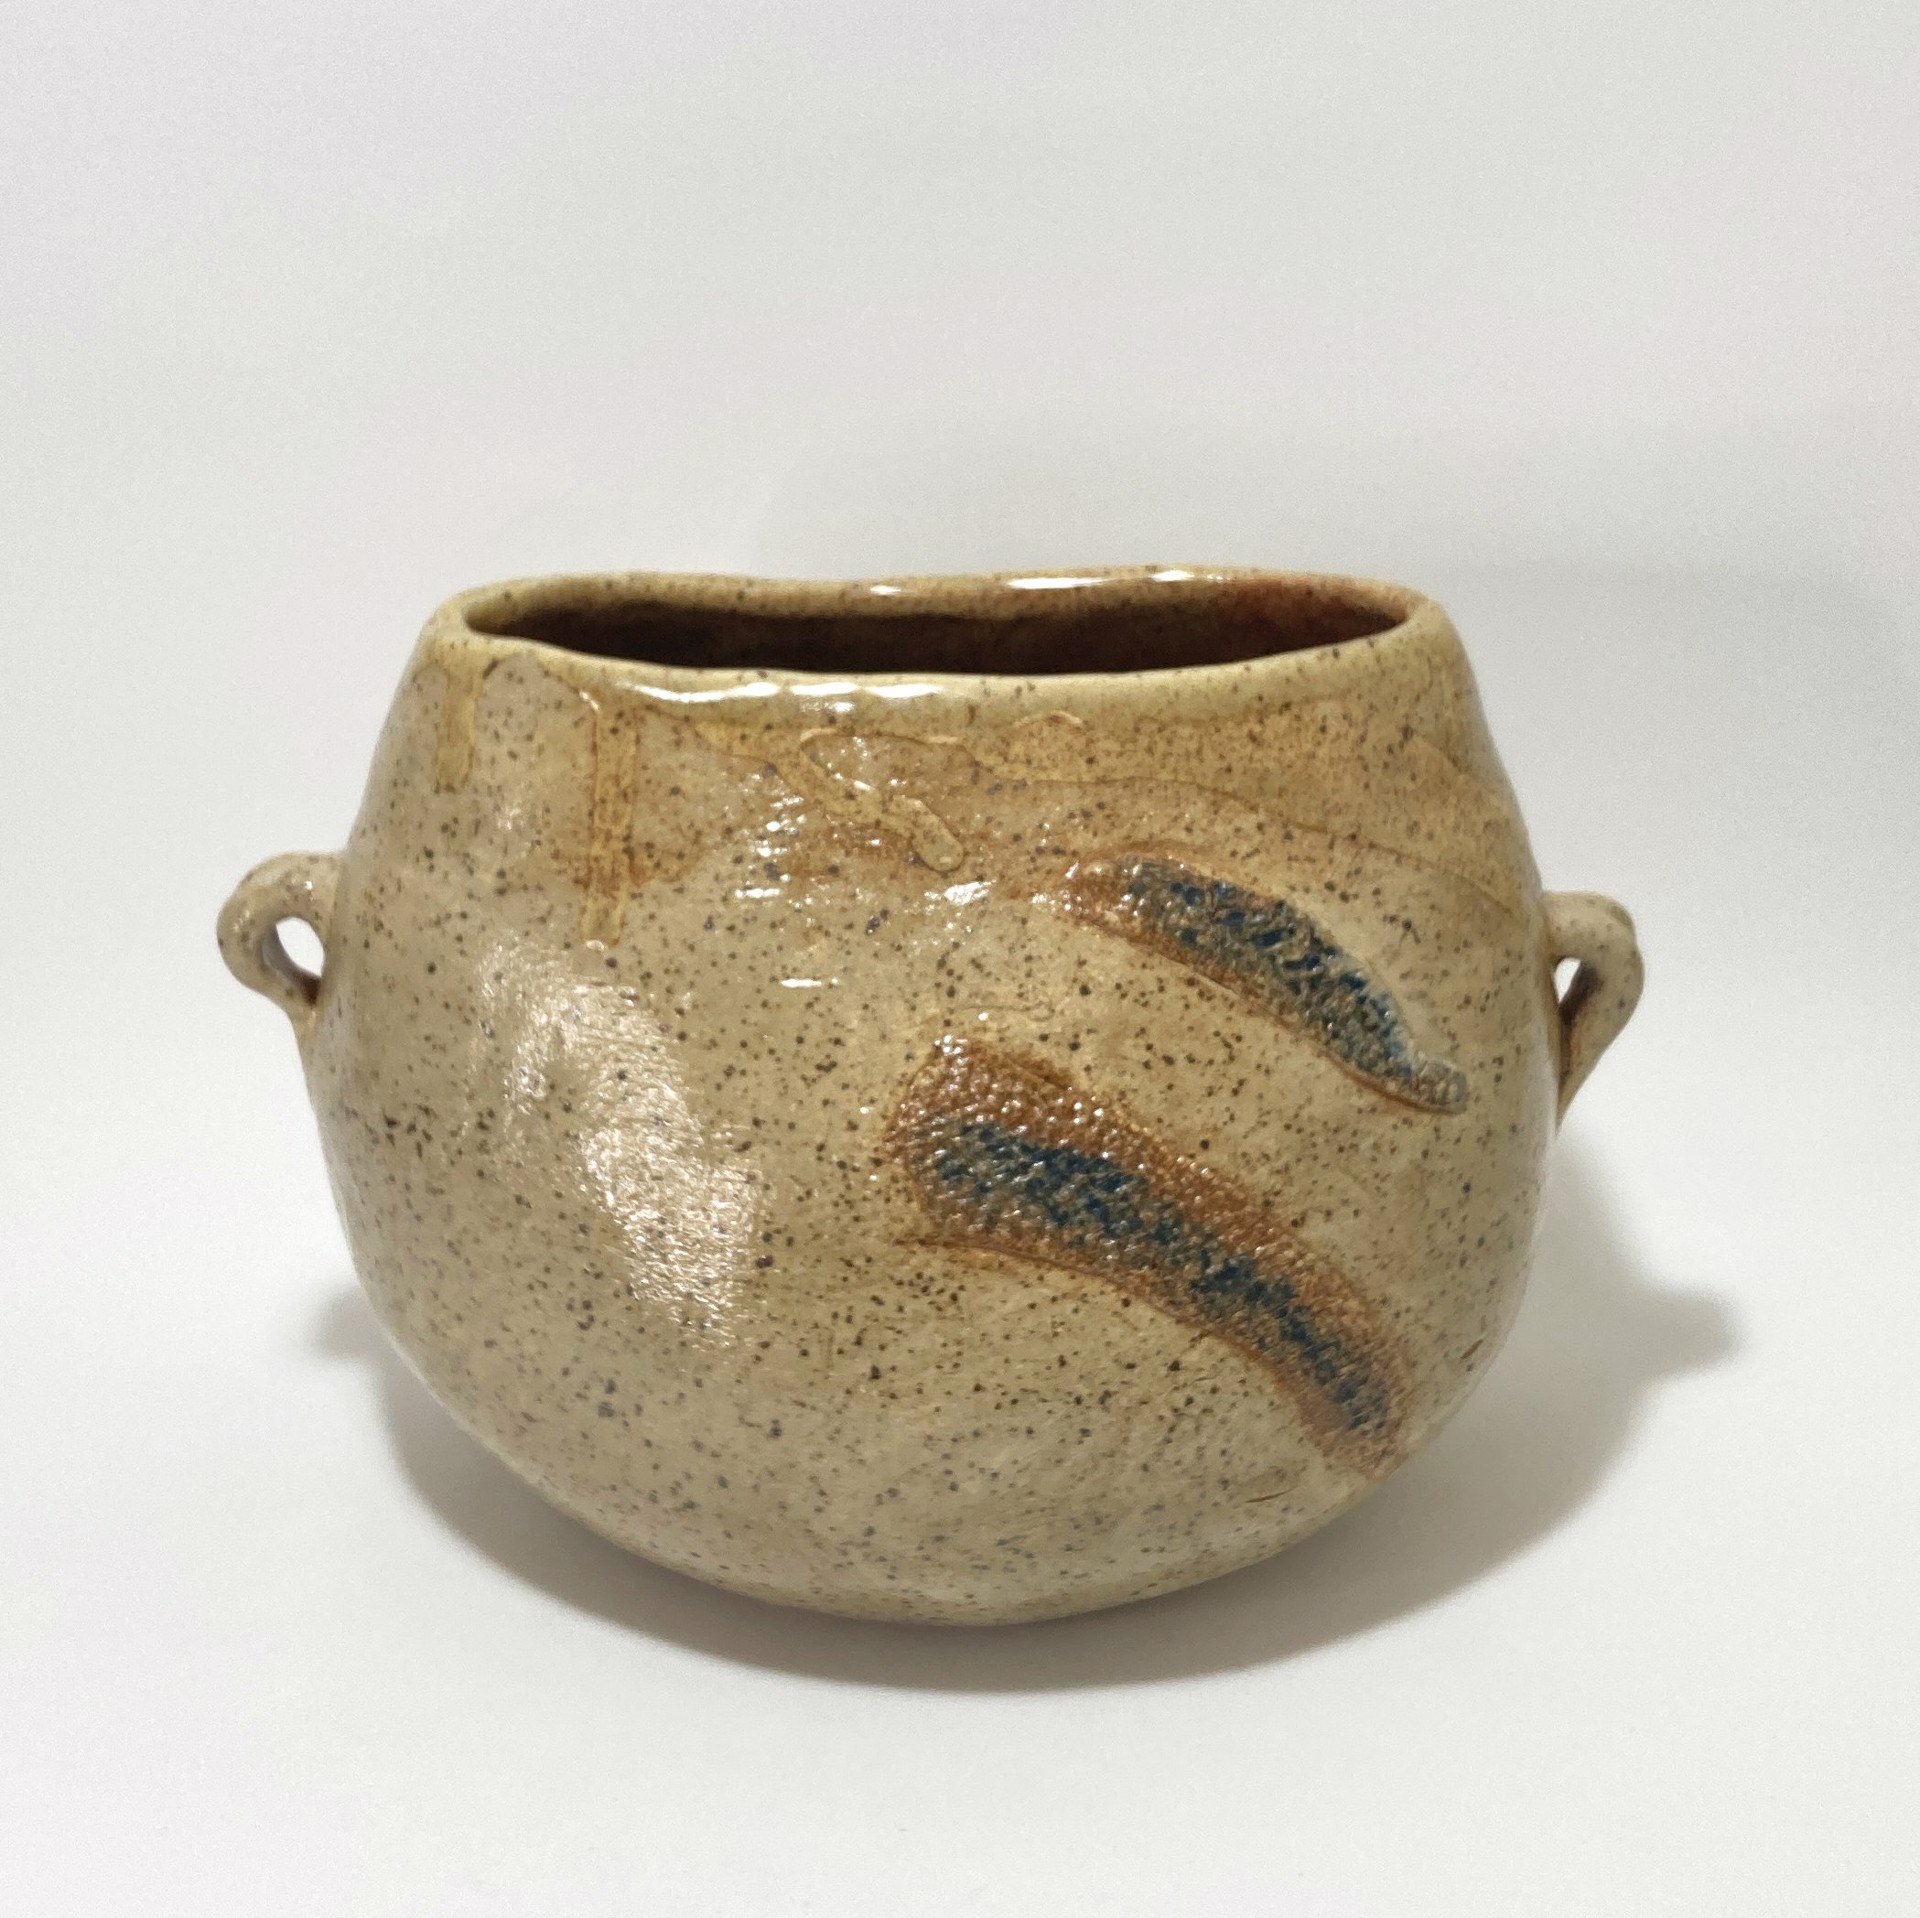 Bucket Pot with Texture and 2 Lugs by Mary Delmege